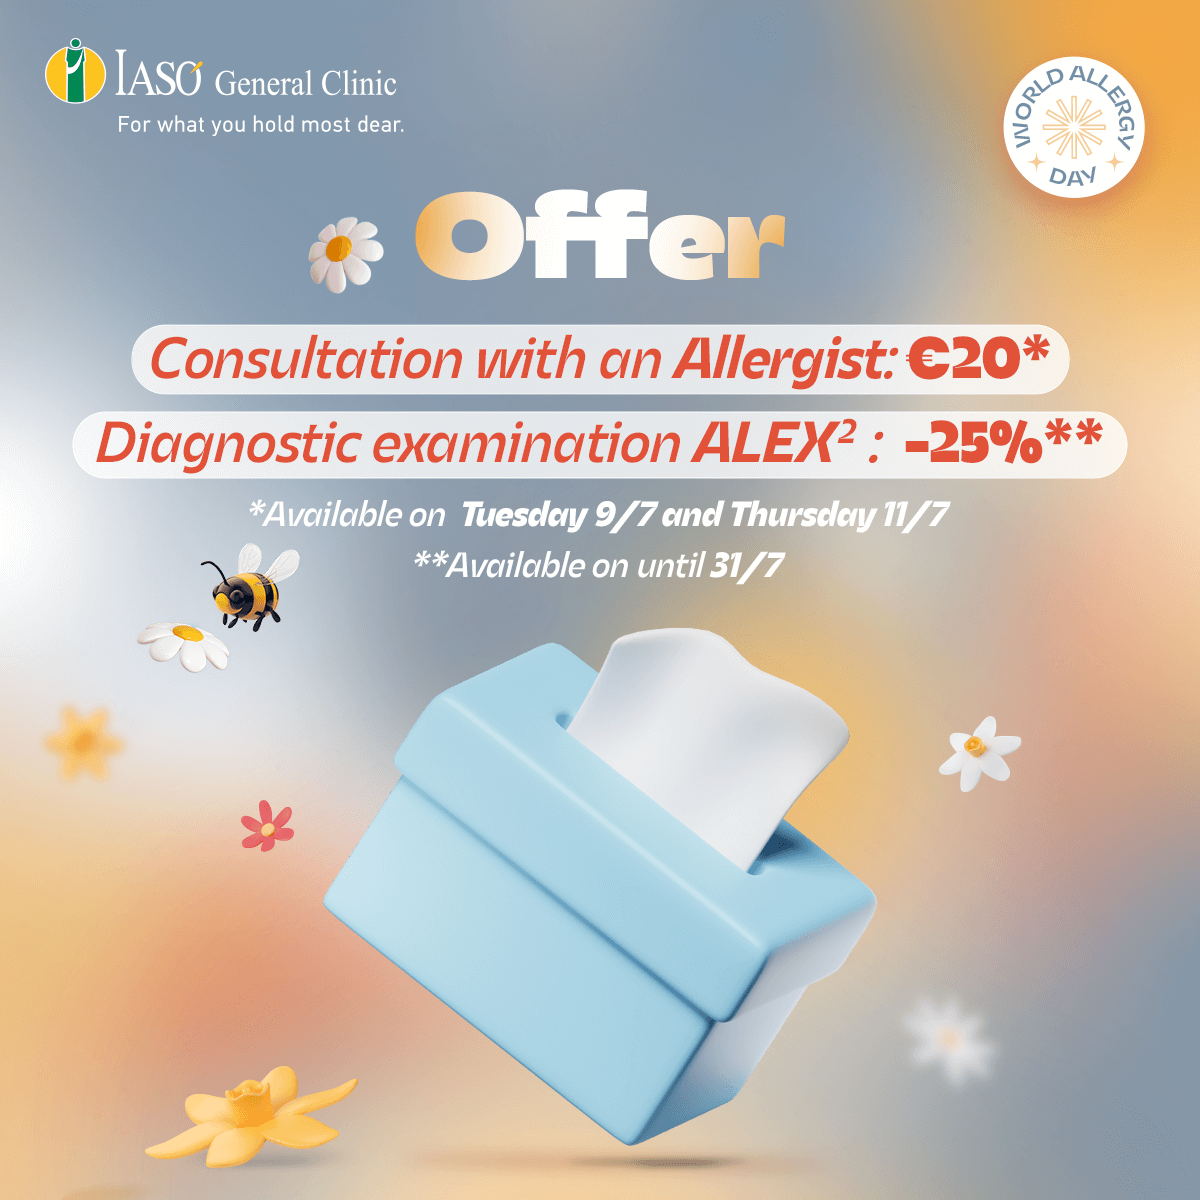 IASO General Clinic: Consultation with an Allergist at the exclusive price of €20 & 25% discount on the diagnostic examination ALEX2, on the occasion of World Allergy Day